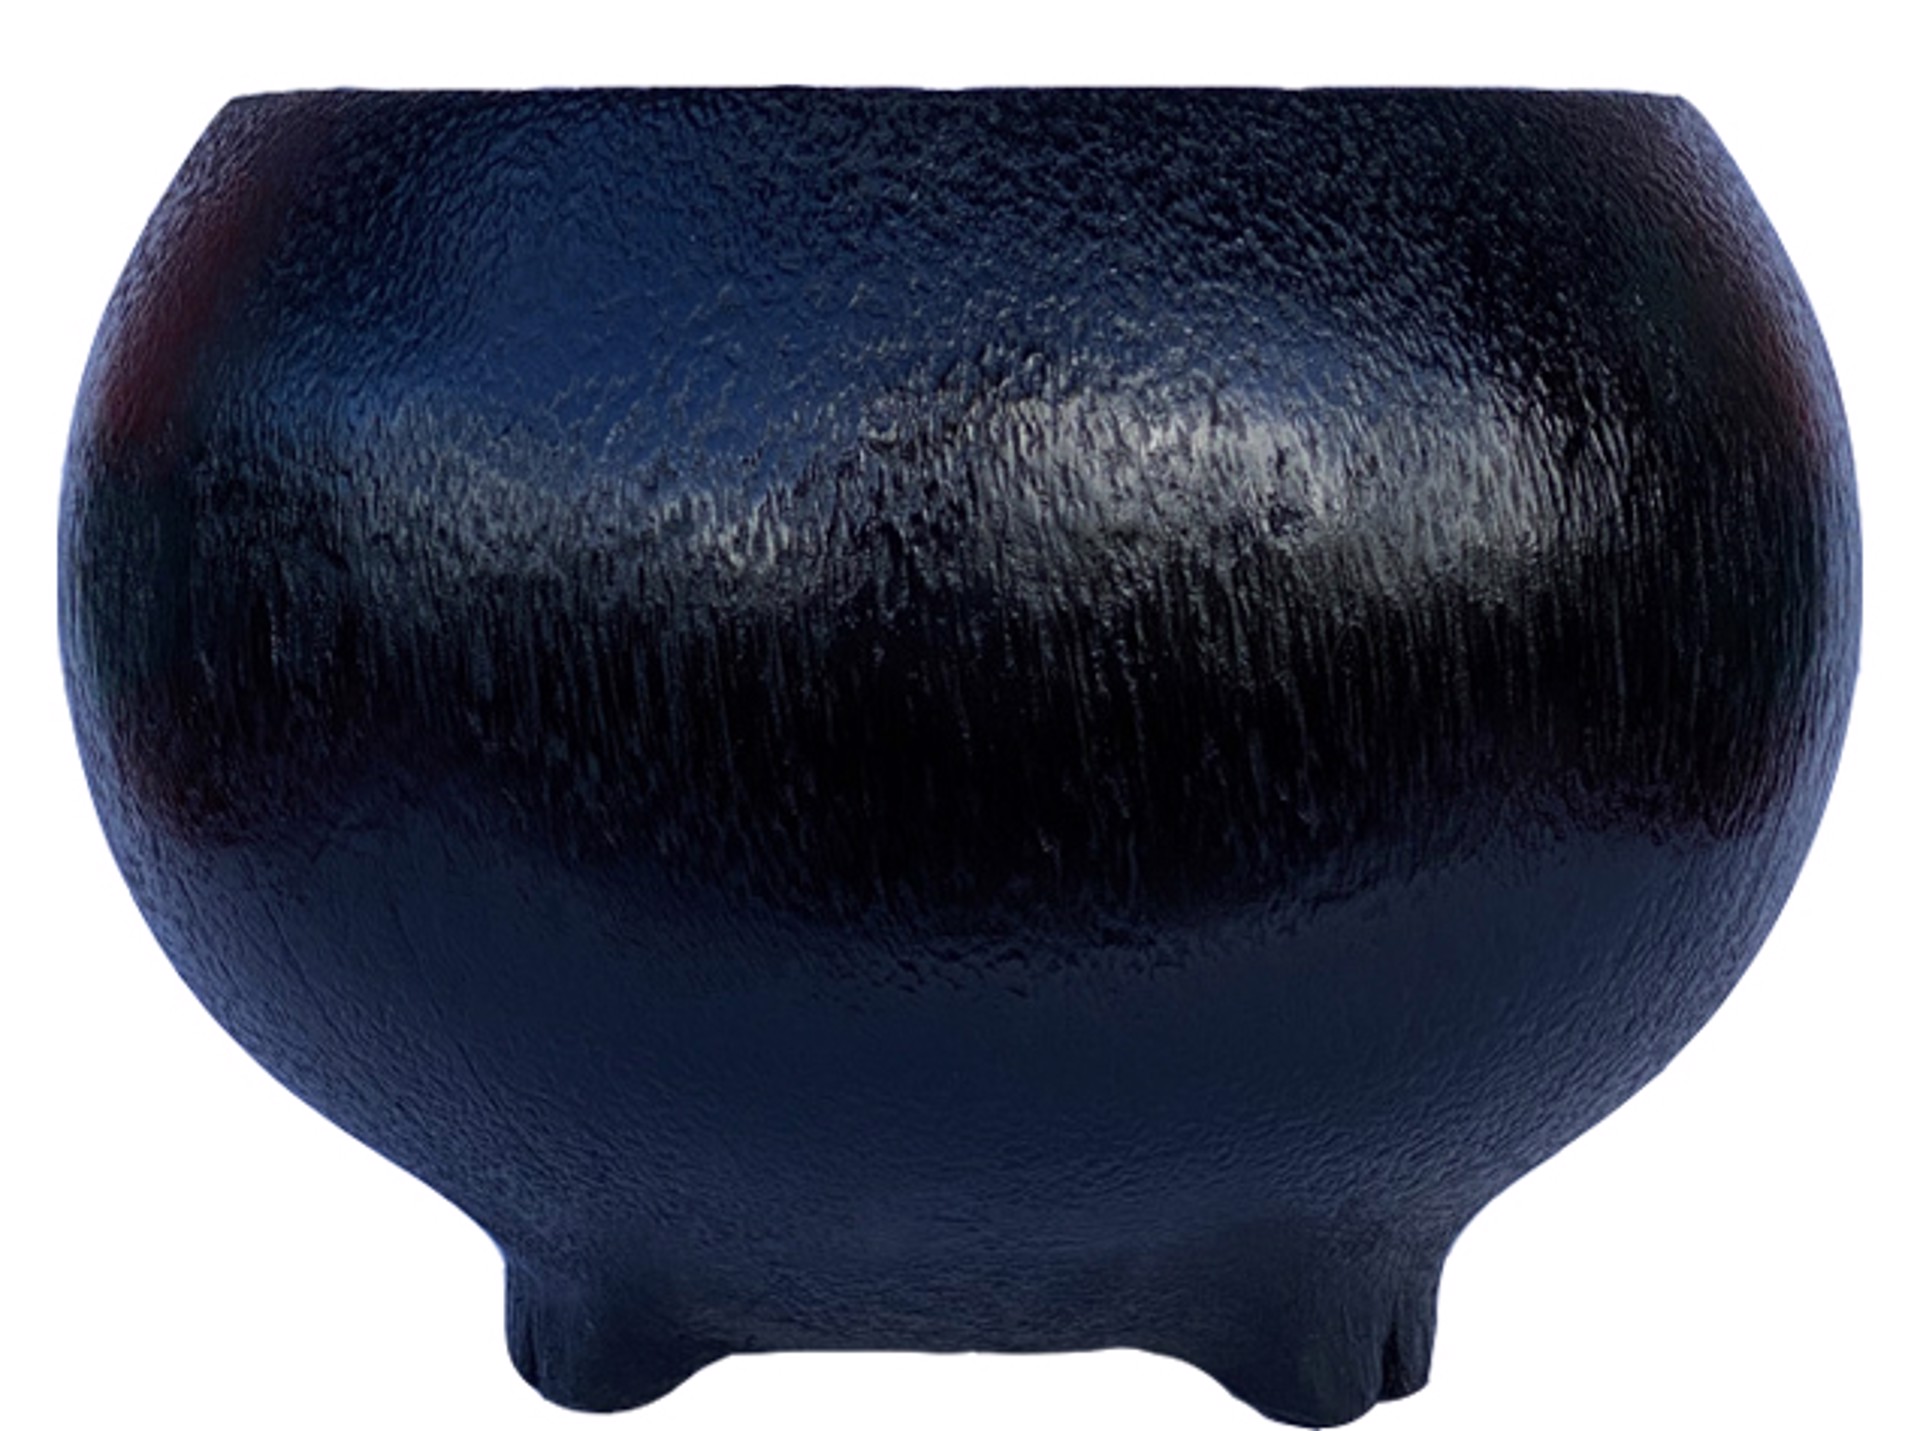 Carbonized Coconut Bowl with Feet by John Fackrell